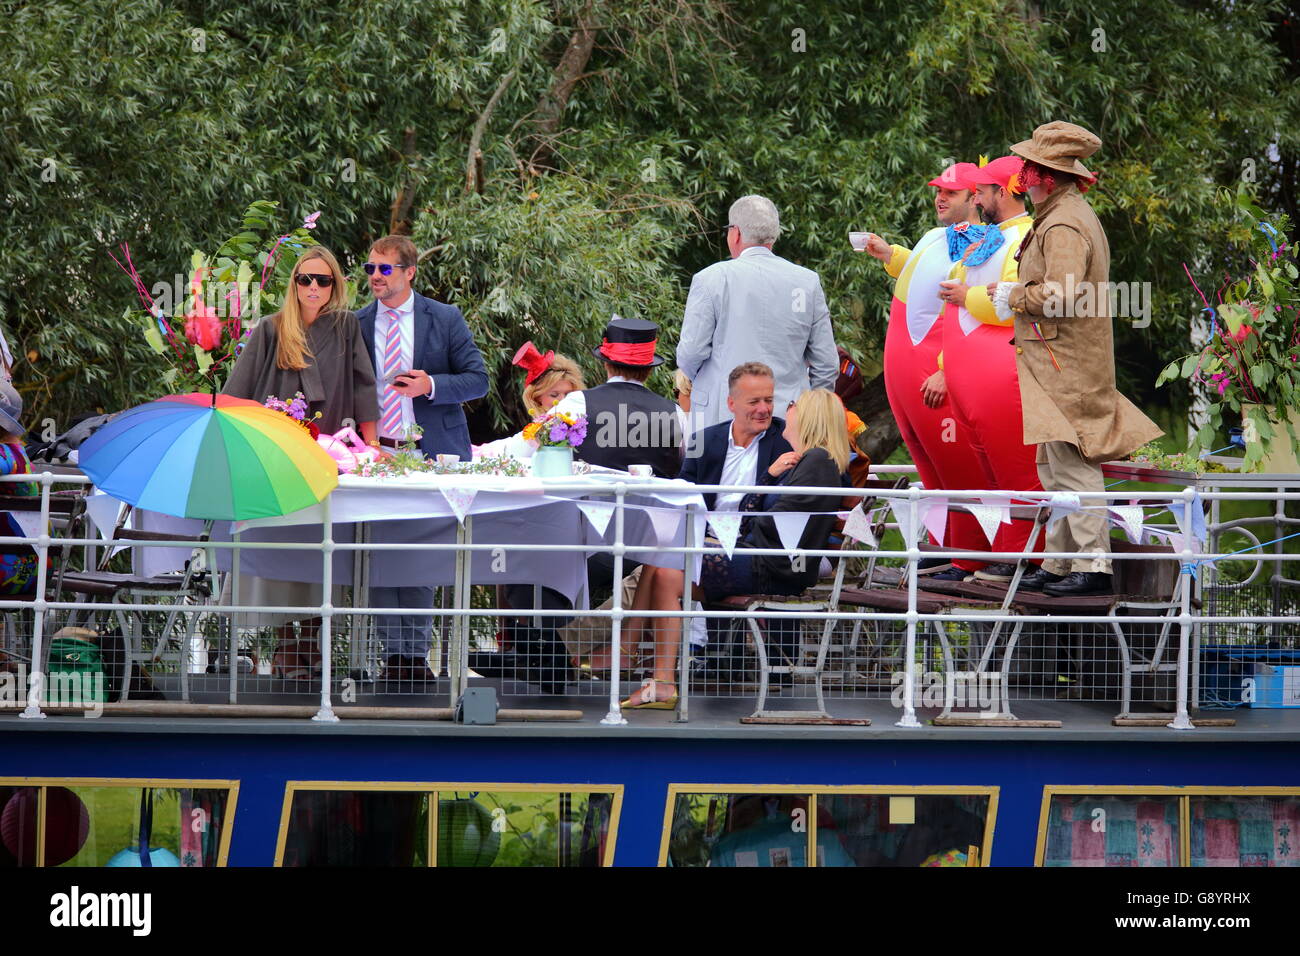 Rowers from all over the world came to the annual Henley Royal Regatta 2016. Spectators watch the competition from the top of a riverboat. Stock Photo